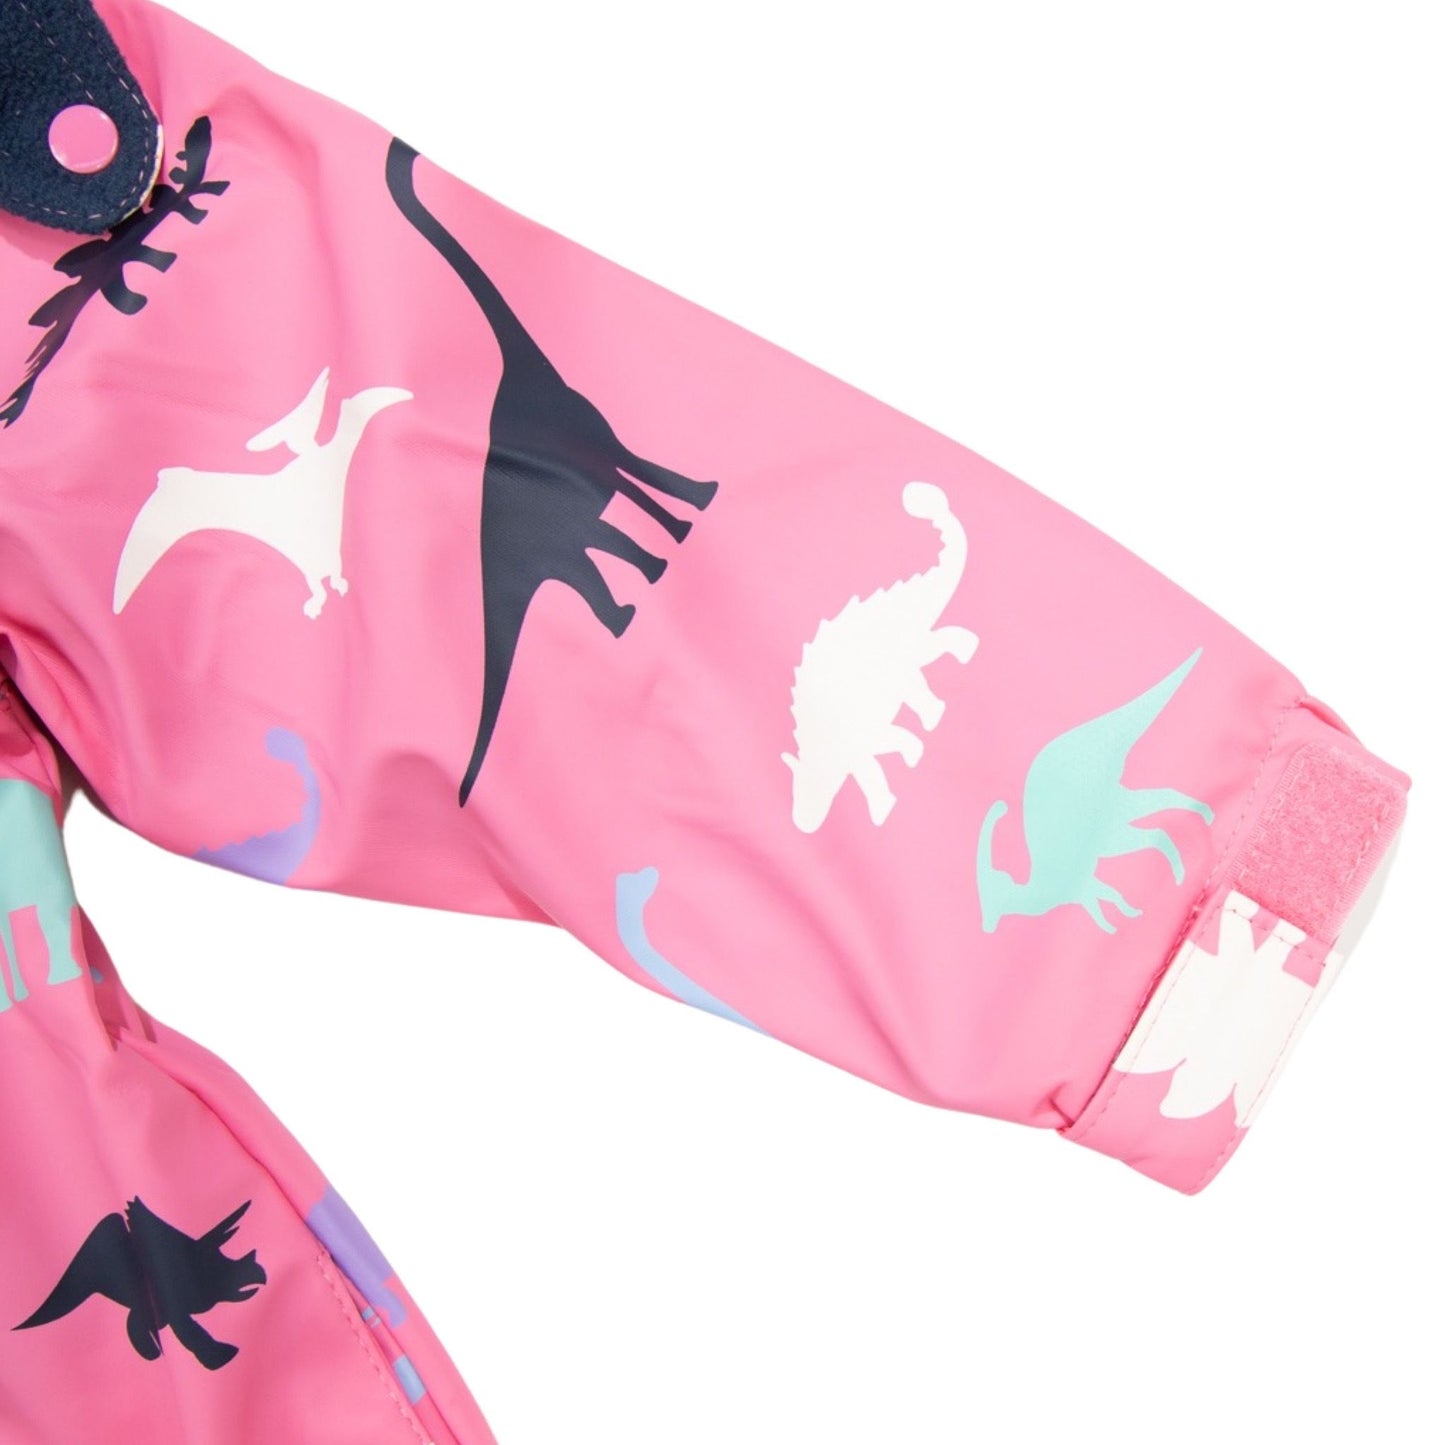 Dino Colour Changing Raincoat Hot Pink